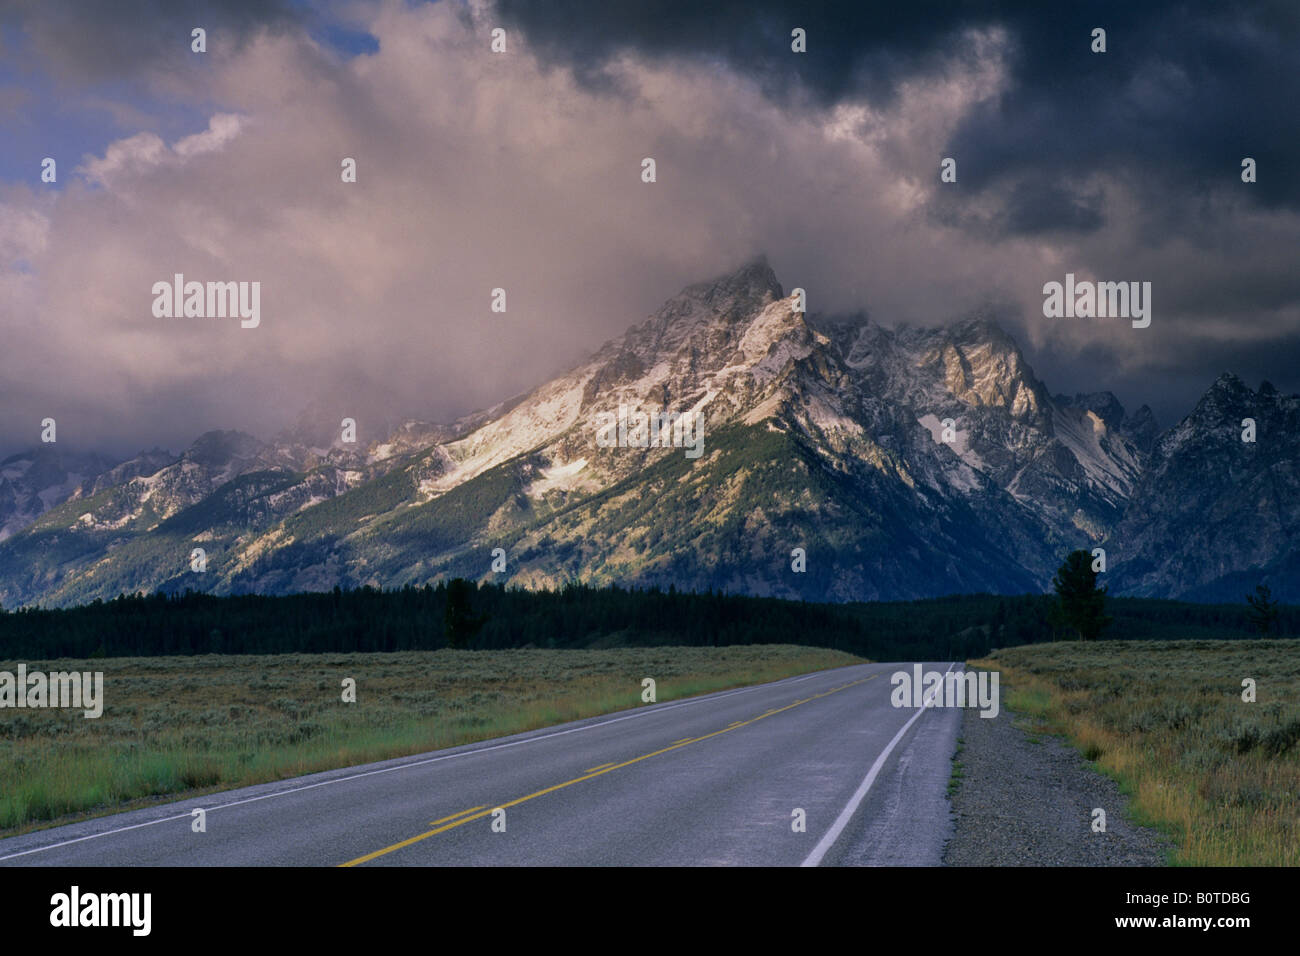 Straight road below mountain range dusted by first snow of fall Grand Teton National Park WYOMING Stock Photo